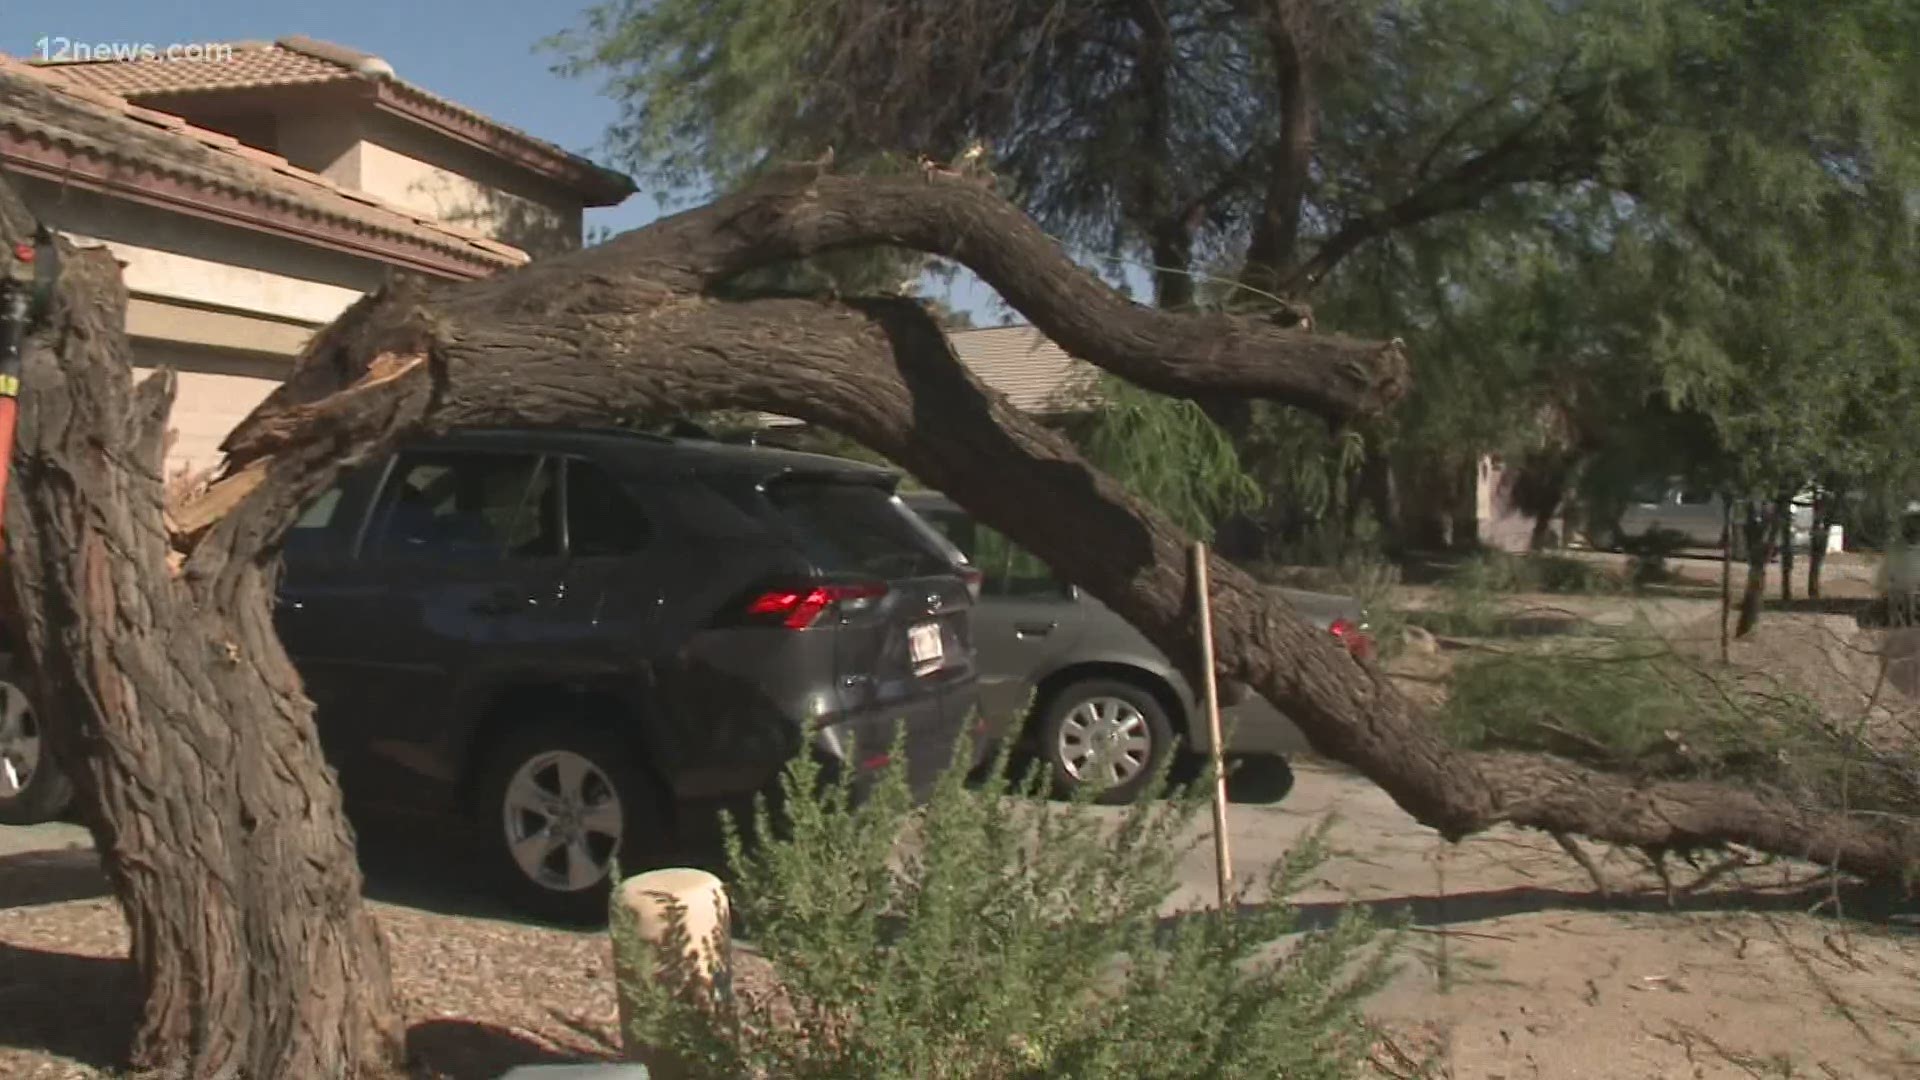 Crews are working to clear a section of a tree out of the way in a Queen Creek neighborhood. A chunk that came down covers an entire section of the sidewalk.